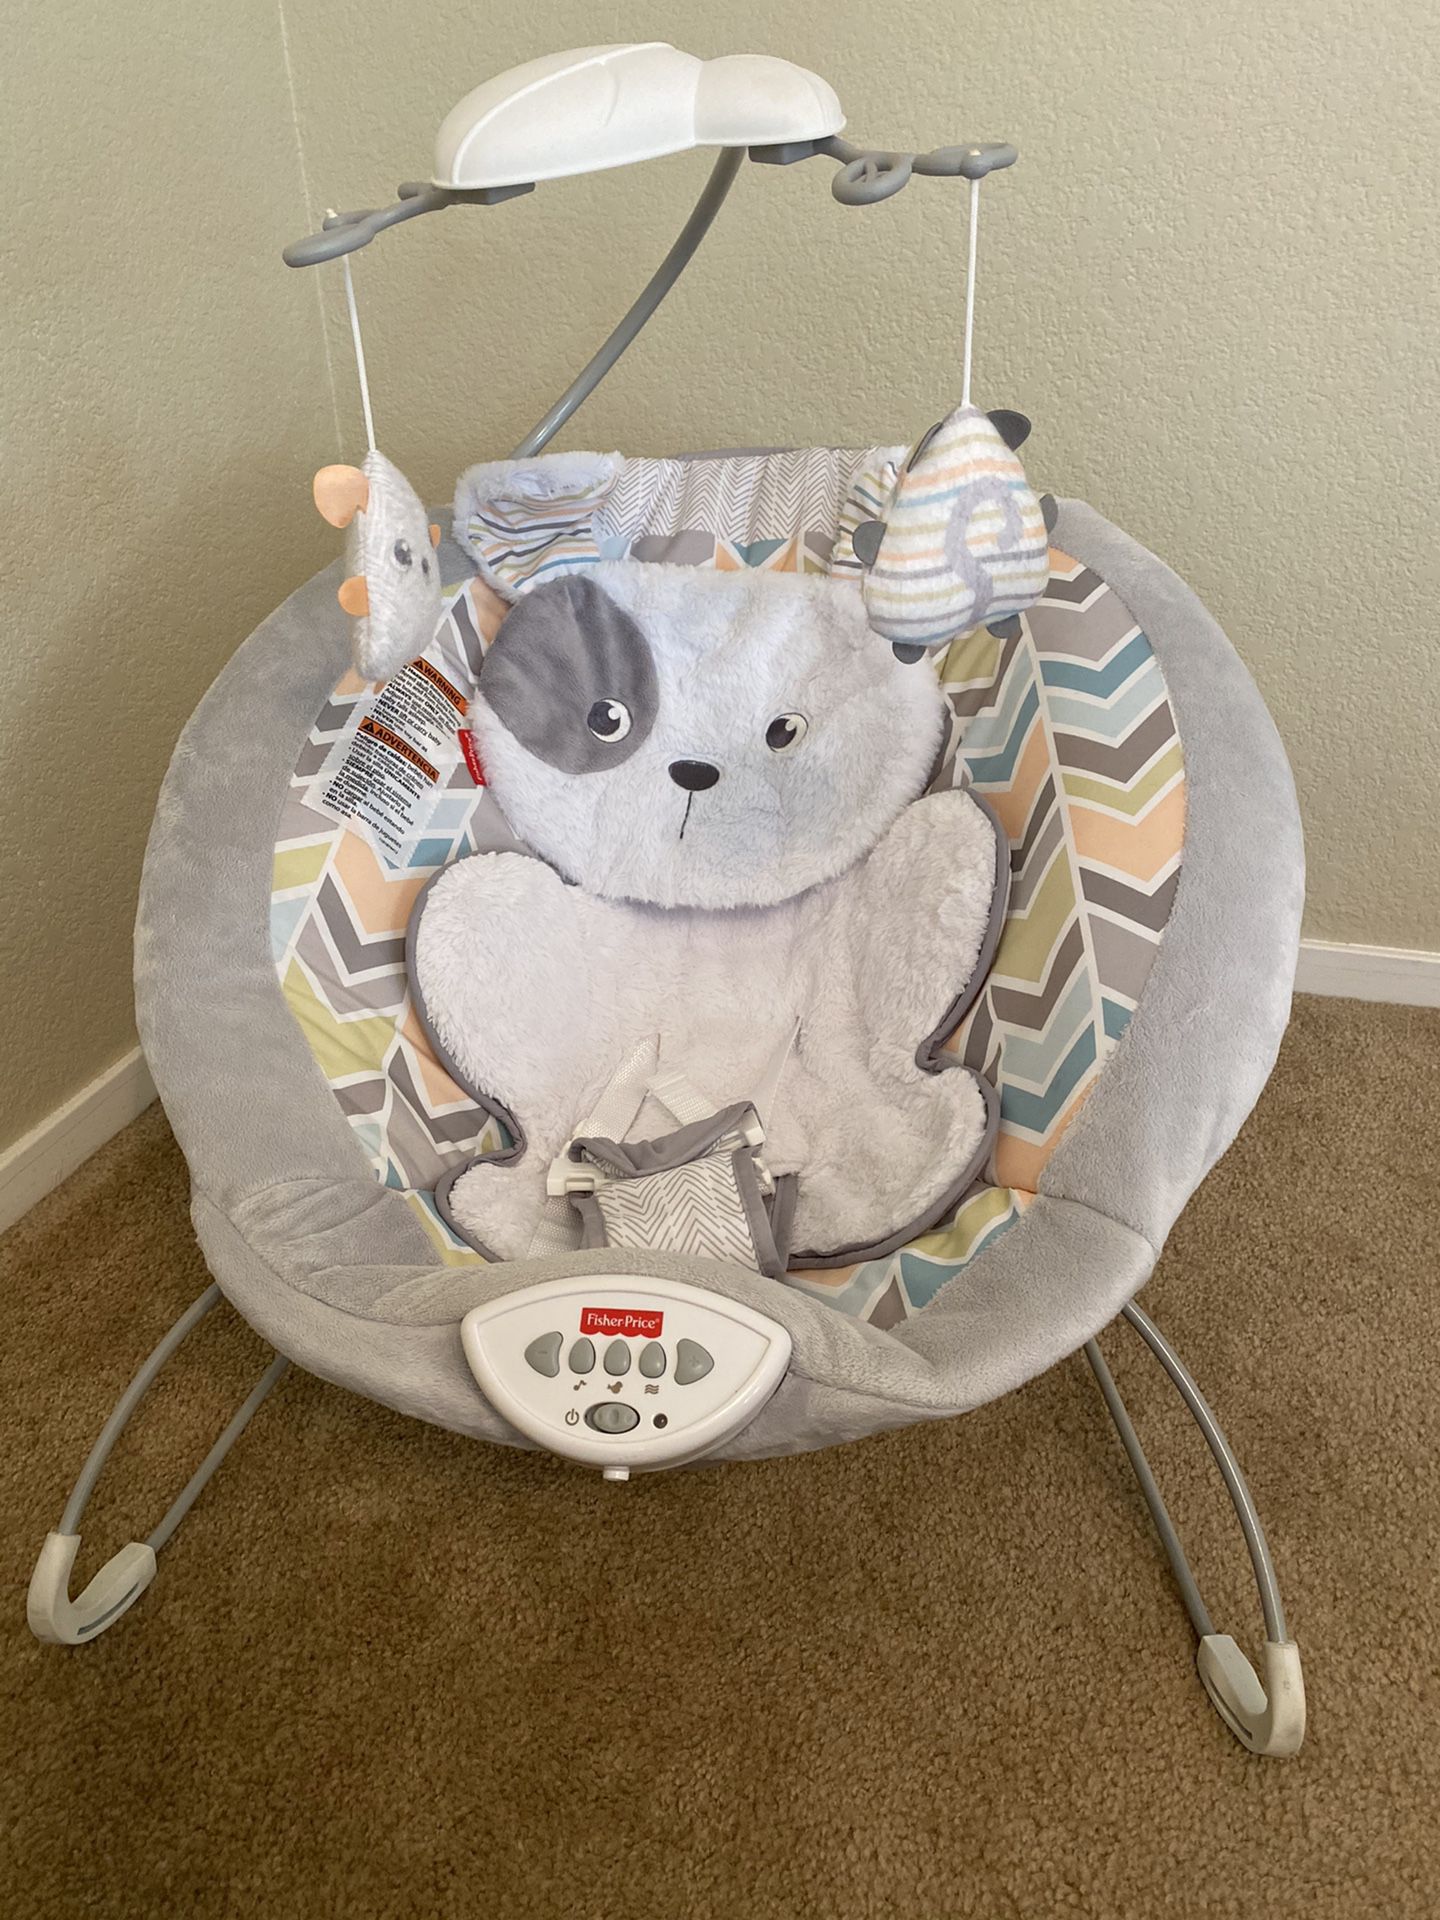 Baby kid’s stuff Bouncer chair, playing mat